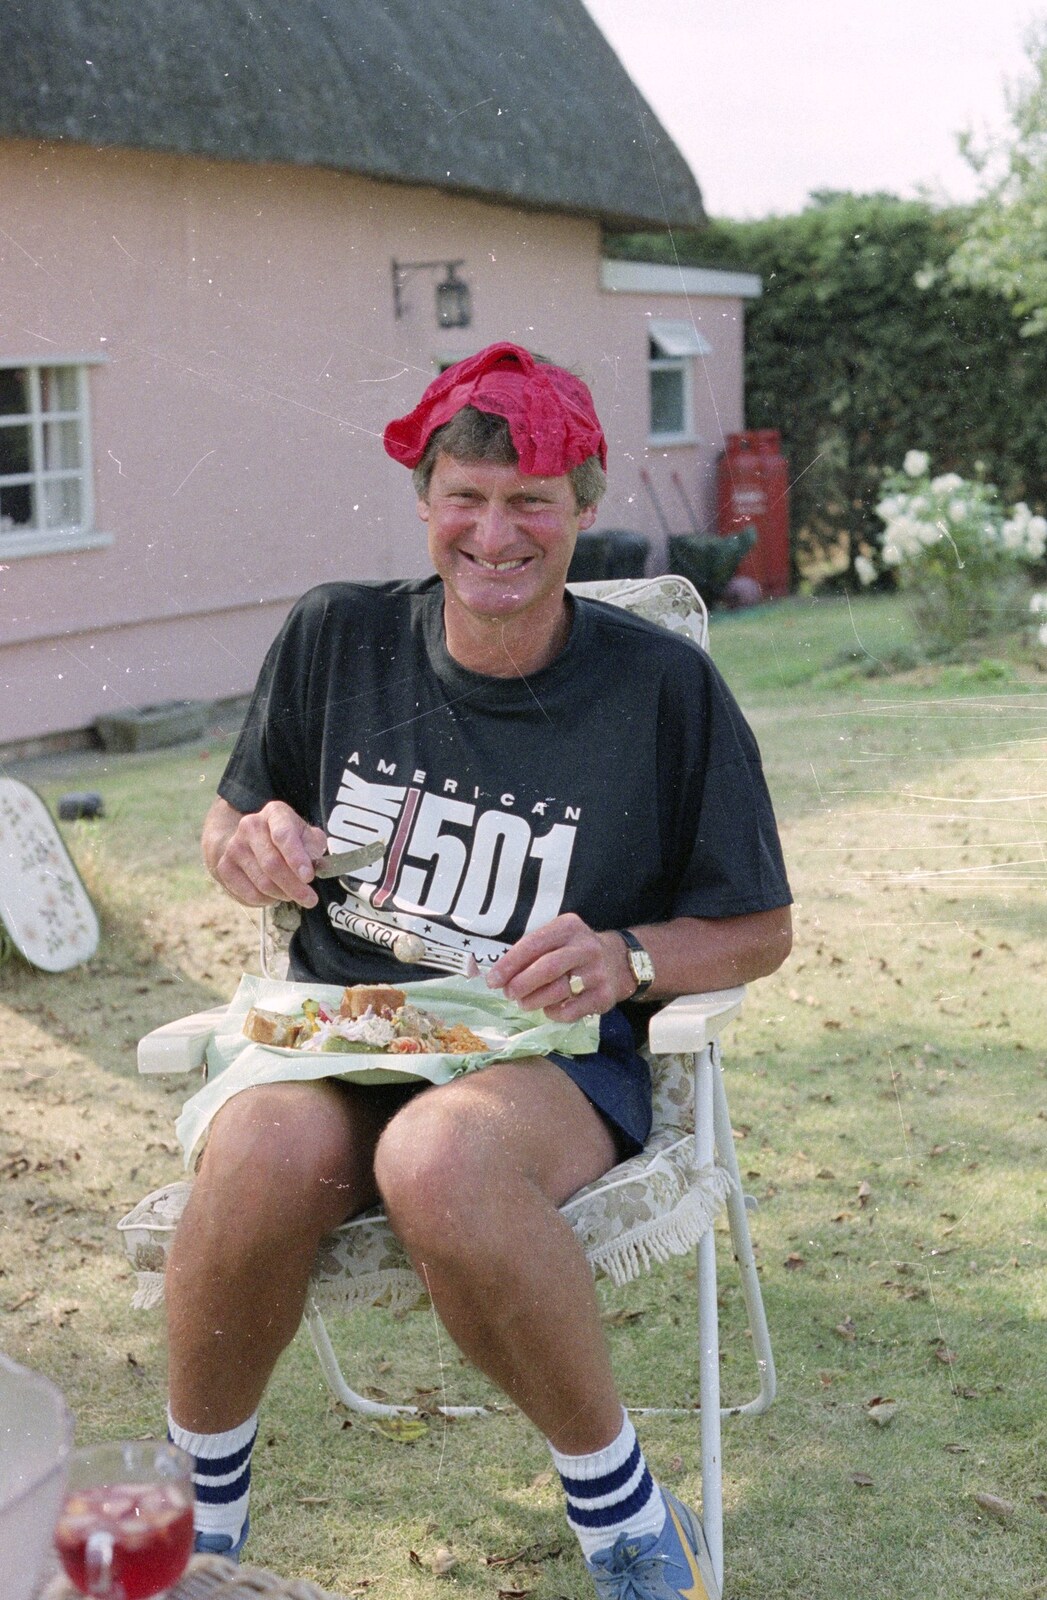 Geoff got some knickers on his head from A Mad Sue Hooley, Stuston, Suffolk  - 5th July 1993